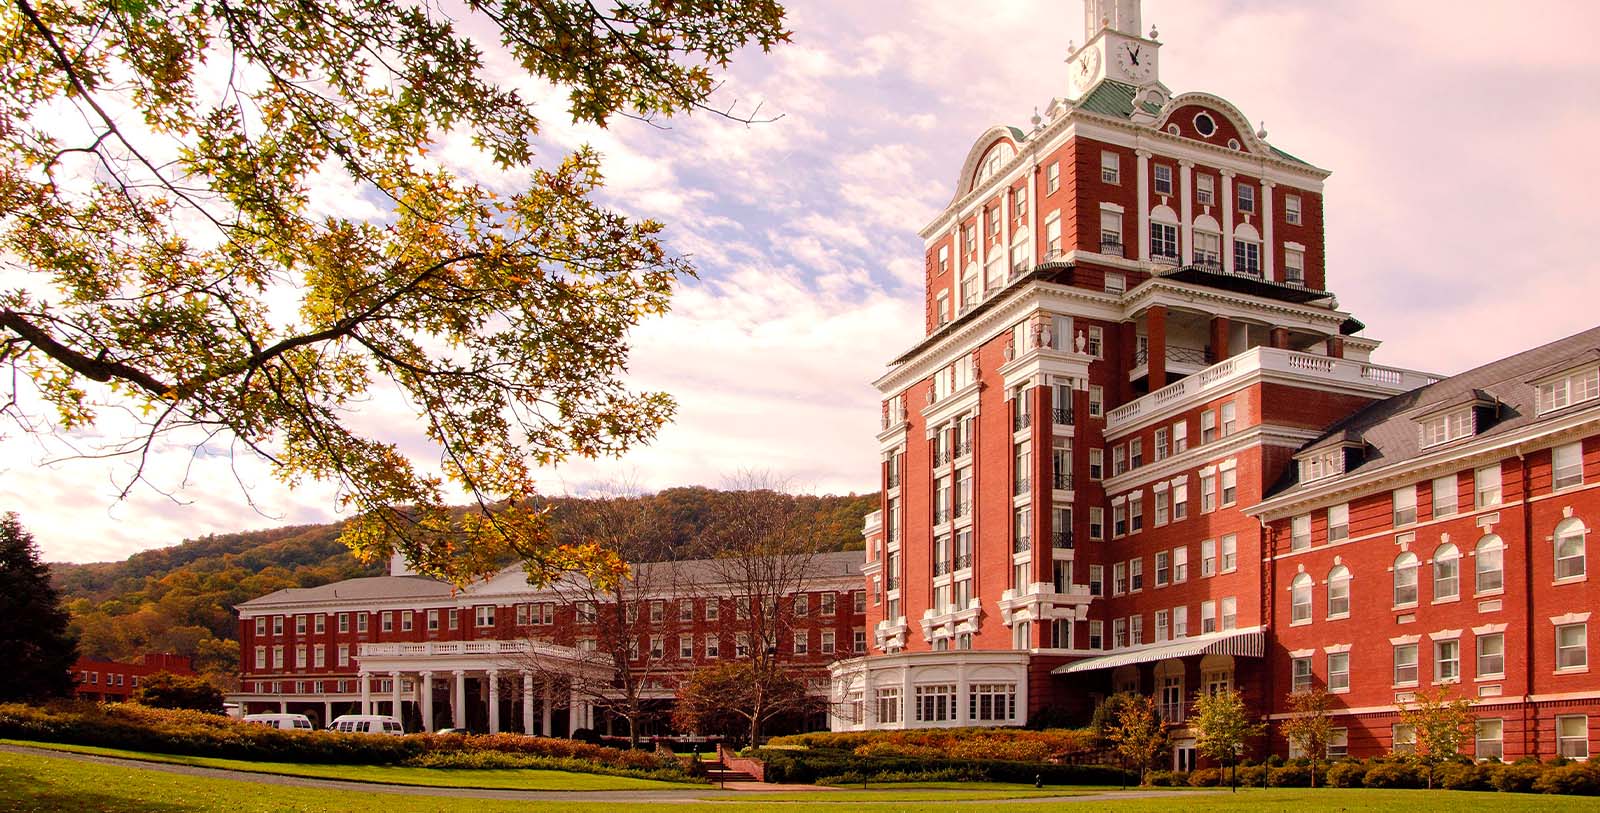 Image of Hotel Exterior The Omni Homestead Resort, 1766, Member of Historic Hotels of America, in Hot Springs, Virginia, Special Offers, Discounted Rates, Families, Romantic Escape, Honeymoons, Anniversaries, Reunions